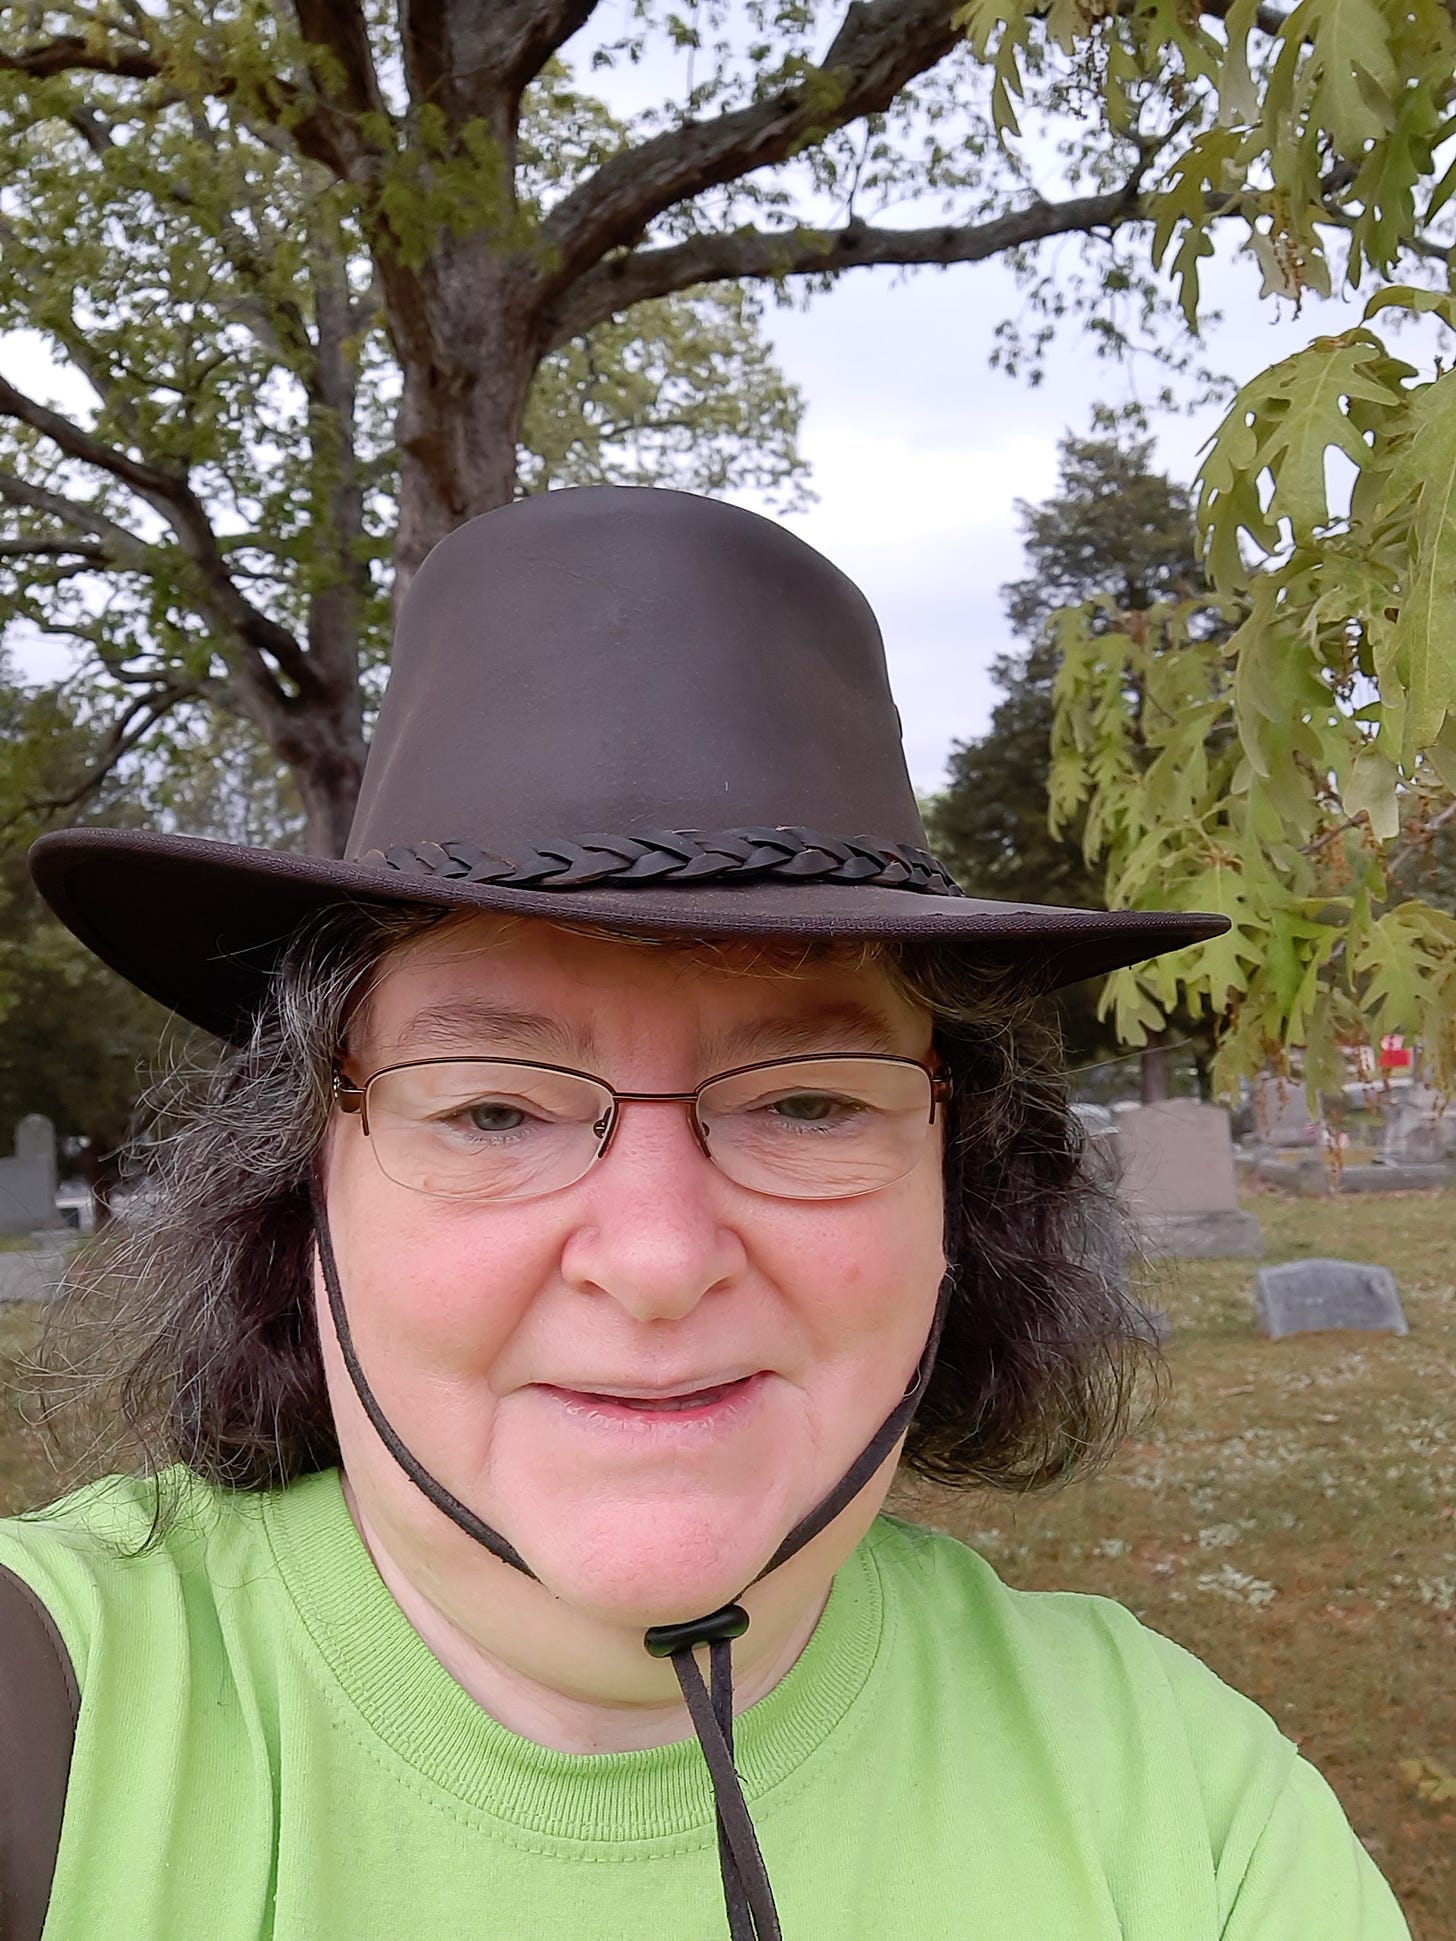 Your author: who is a white woman in a leather hat standing by an oak tree in a local cemetery.